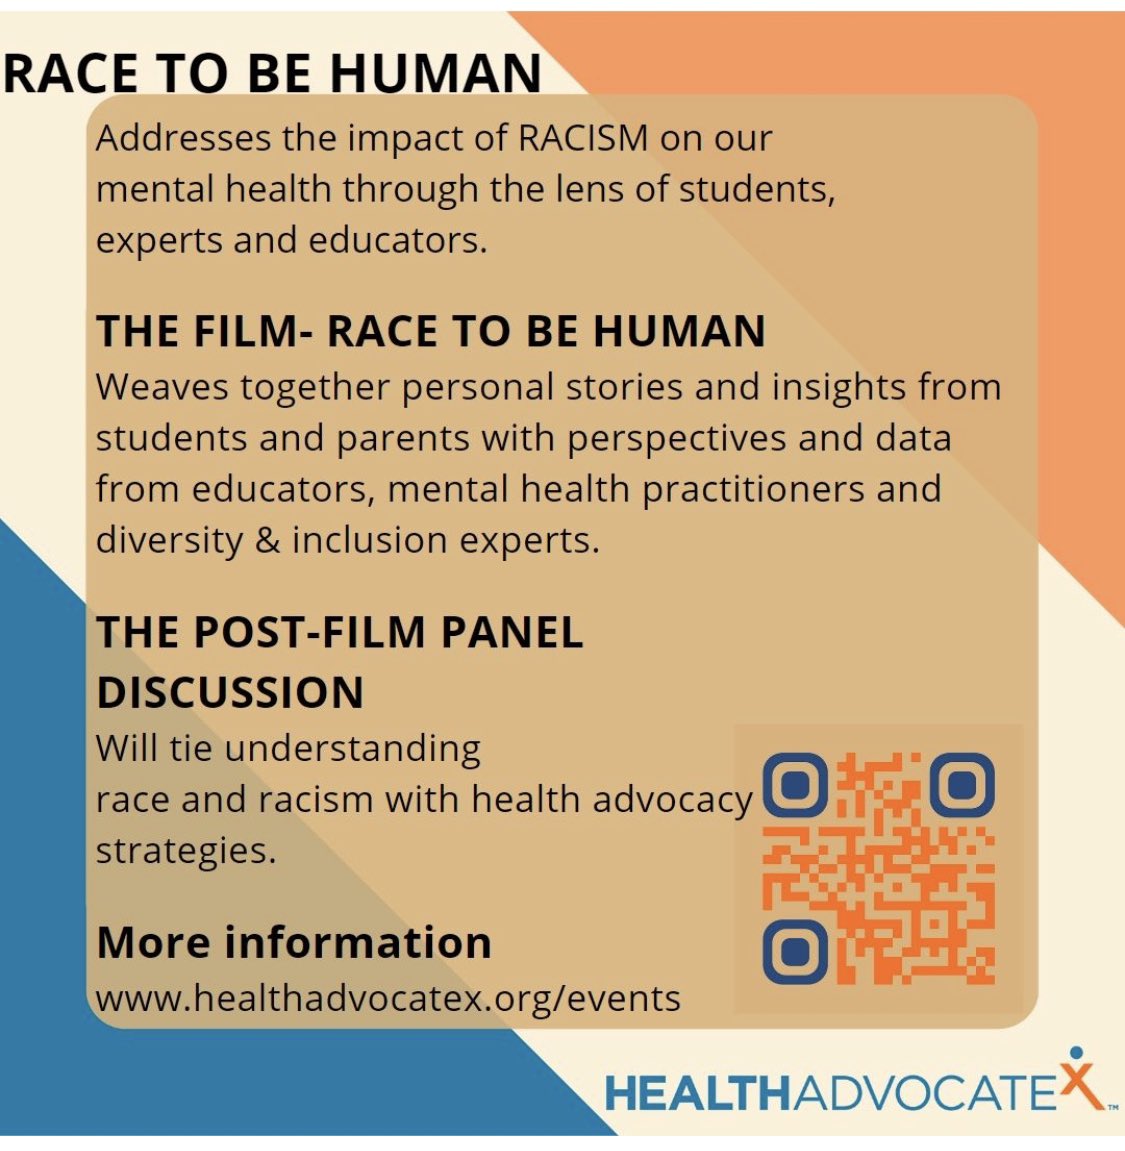 I am excited to join @HealthAdvocateX for their screening of RACE to be Human. More information will available in images below

Will you join us?

Register at bit.ly/Race2Bh327

@PublicHealth @national_pain #DisabilityTwitter #MedTwitter #PatientCare #HealthAdvocacy
1/